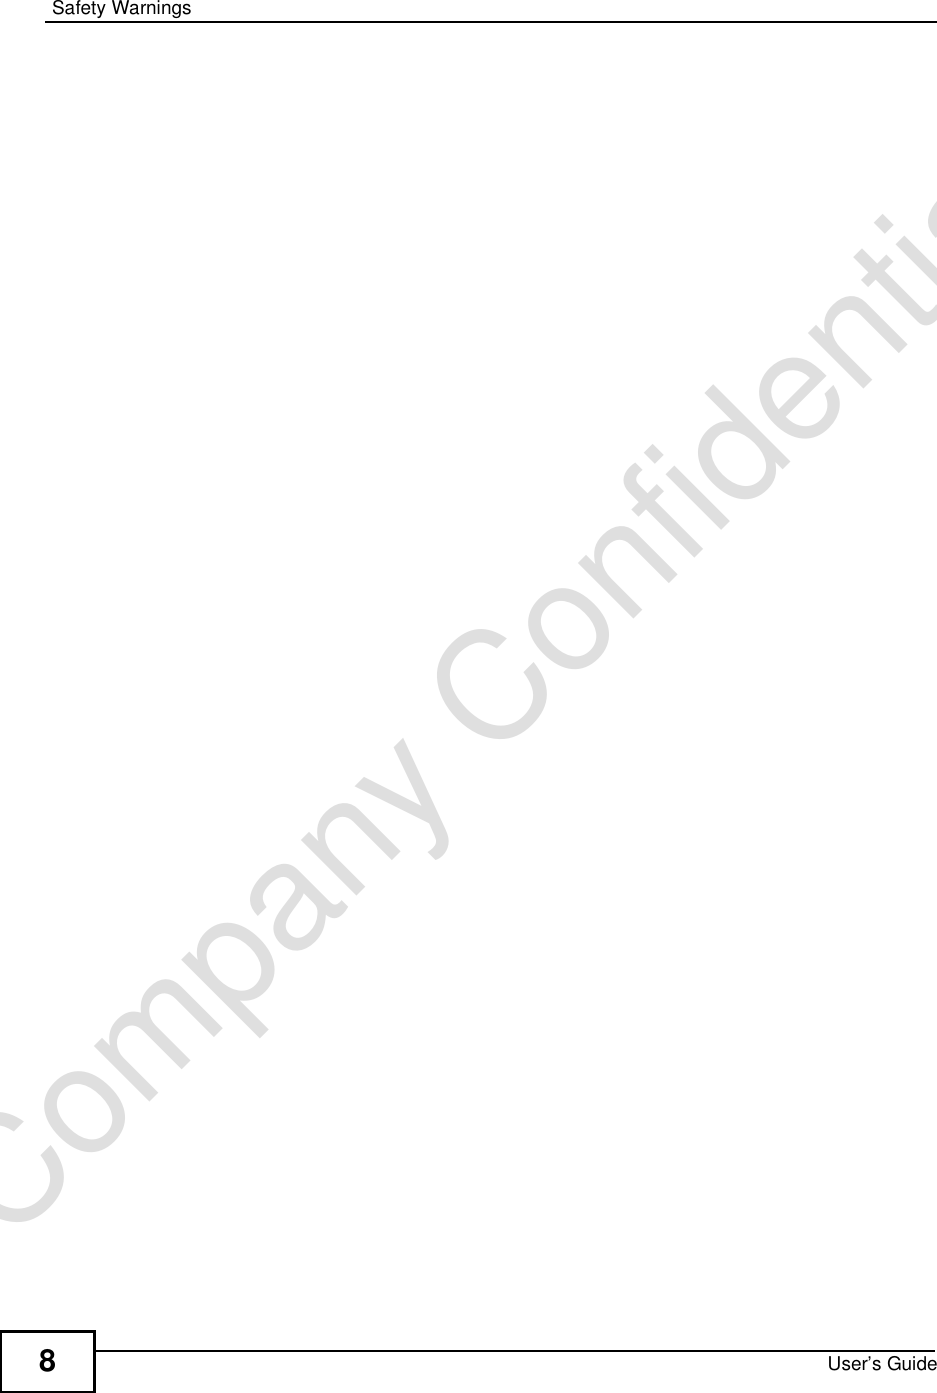 Safety WarningsUser’s Guide8Company Confidential